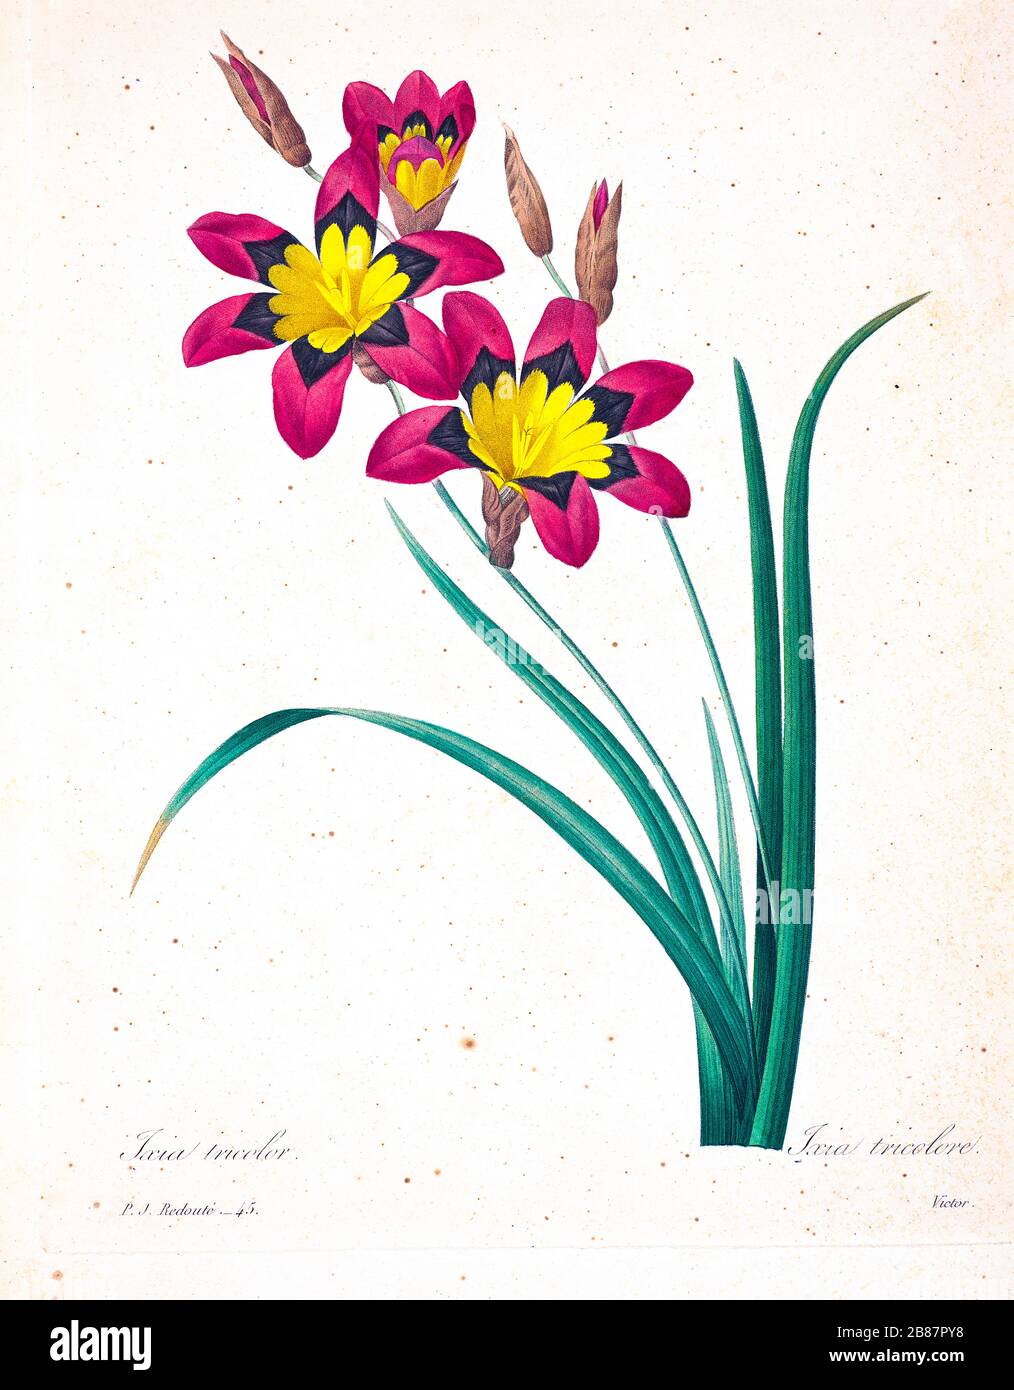 19th-century hand painted Engraving illustration of a Sparaxis tricolor, known by the common names wandflower, harlequin flower, and sparaxis, is a bulb-forming perennial plant [here as Ixia tricolor] by Pierre-Joseph Redoute. Published in Choix Des Plus Belles Fleurs, Paris (1827). by Redouté, Pierre Joseph, 1759-1840.; Chapuis, Jean Baptiste.; Ernest Panckoucke.; Langois, Dr.; Bessin, R.; Victor, fl. ca. 1820-1850. Stock Photo